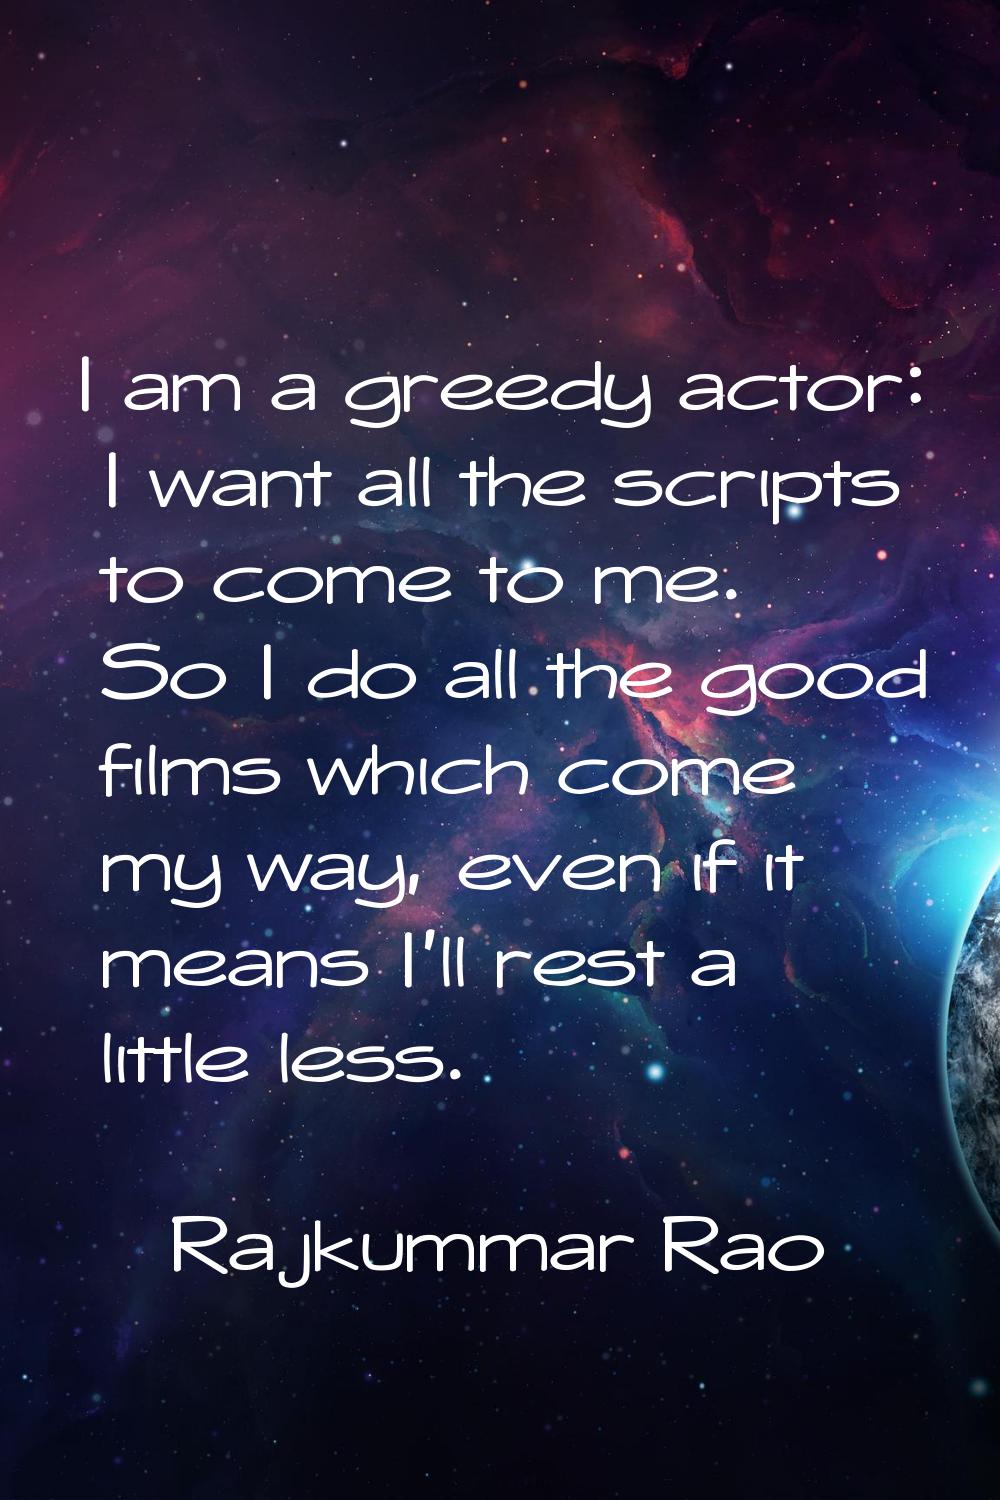 I am a greedy actor: I want all the scripts to come to me. So I do all the good films which come my